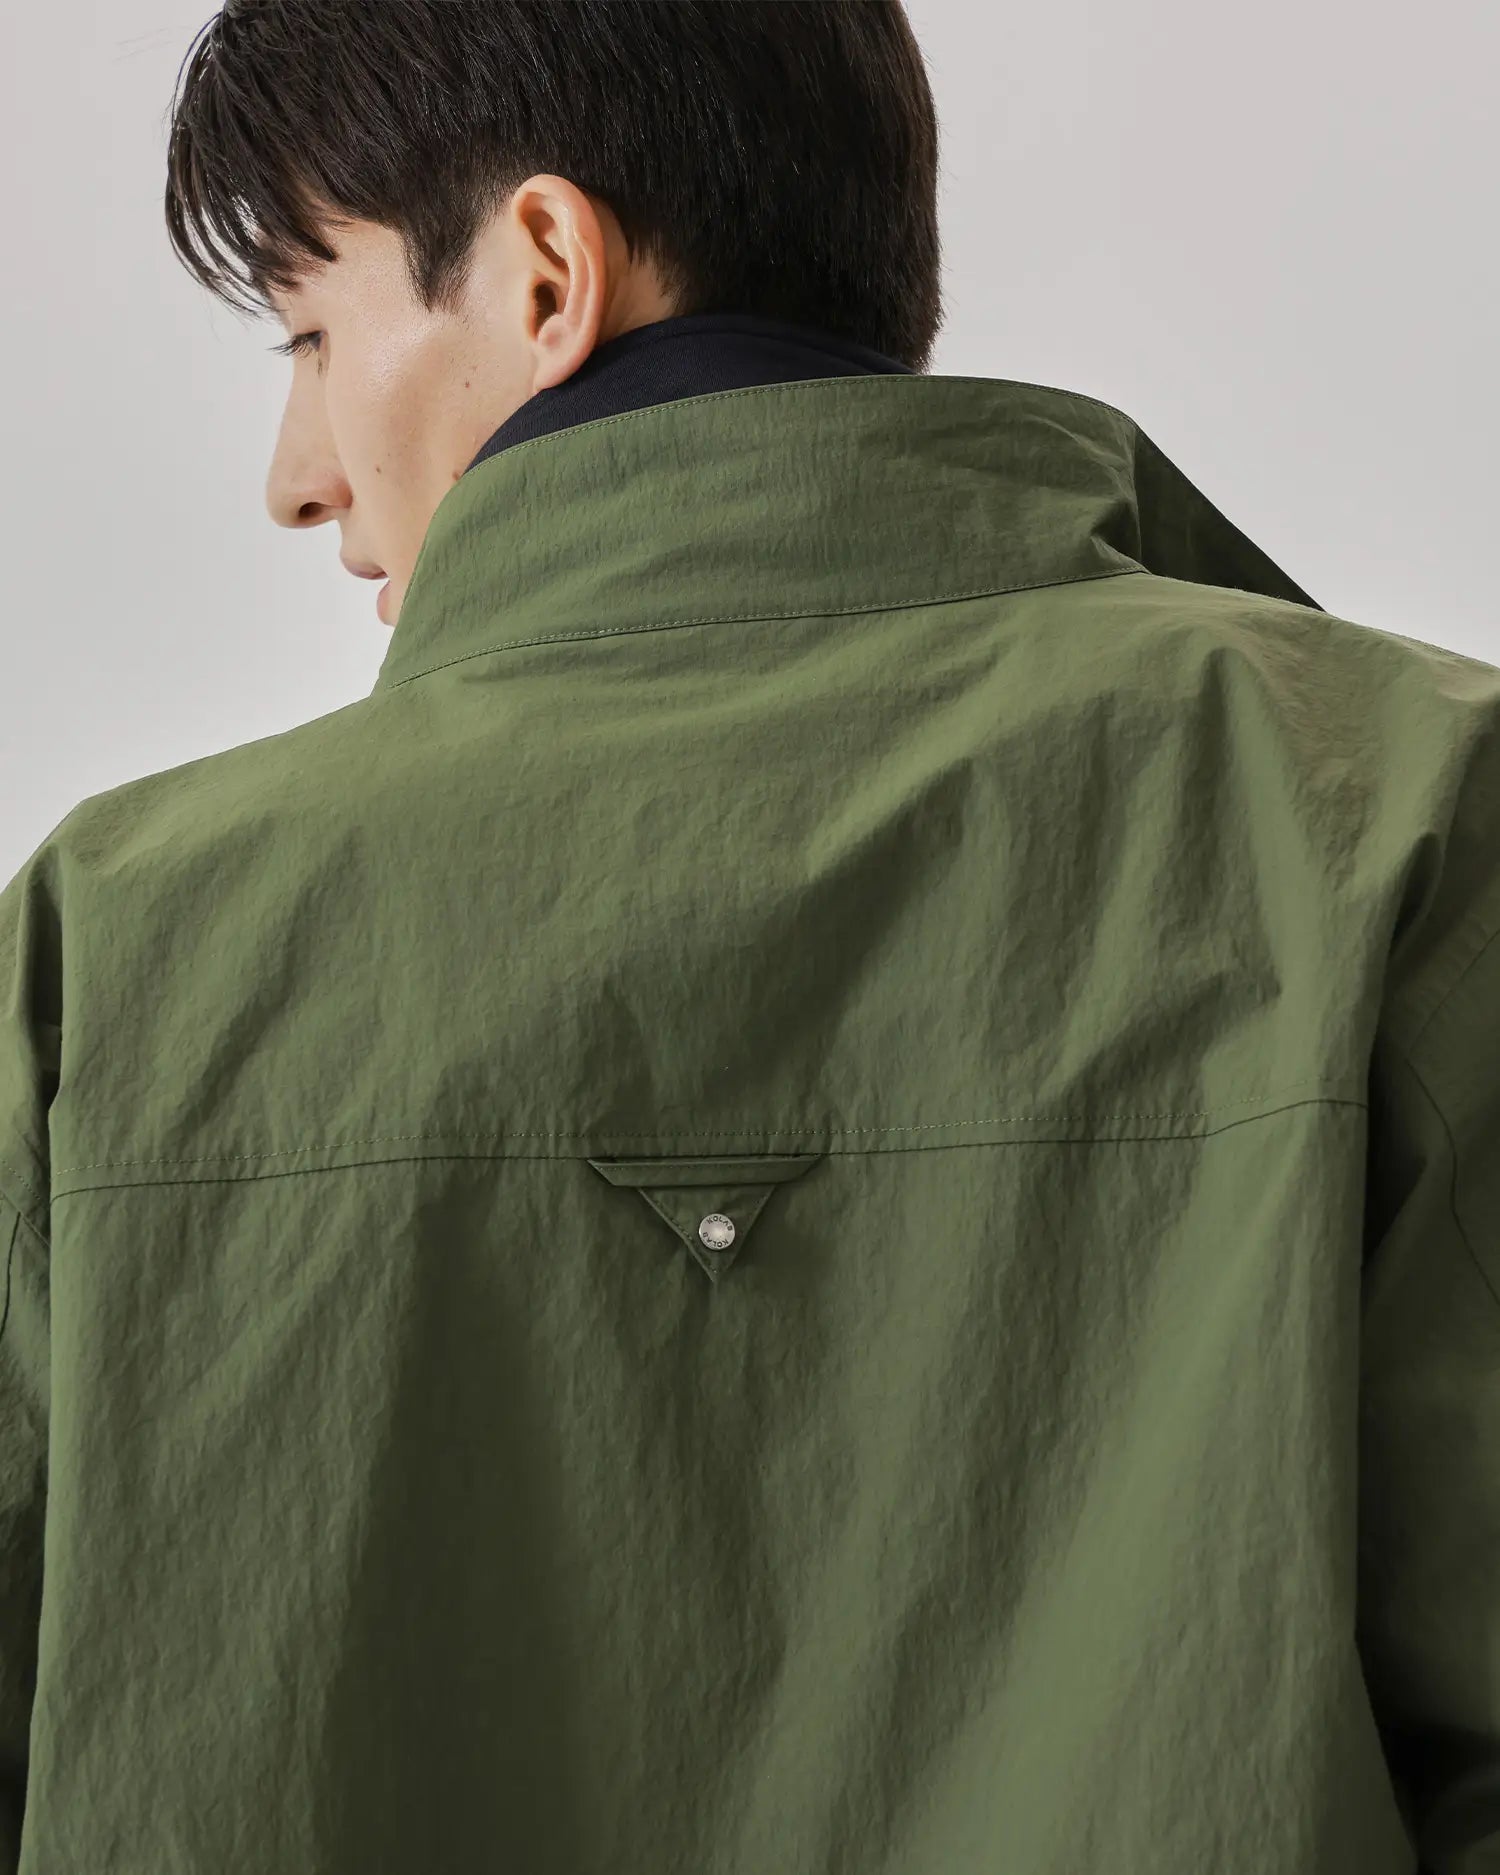 Men's Crew Jacket in Military Green 07 #military-green